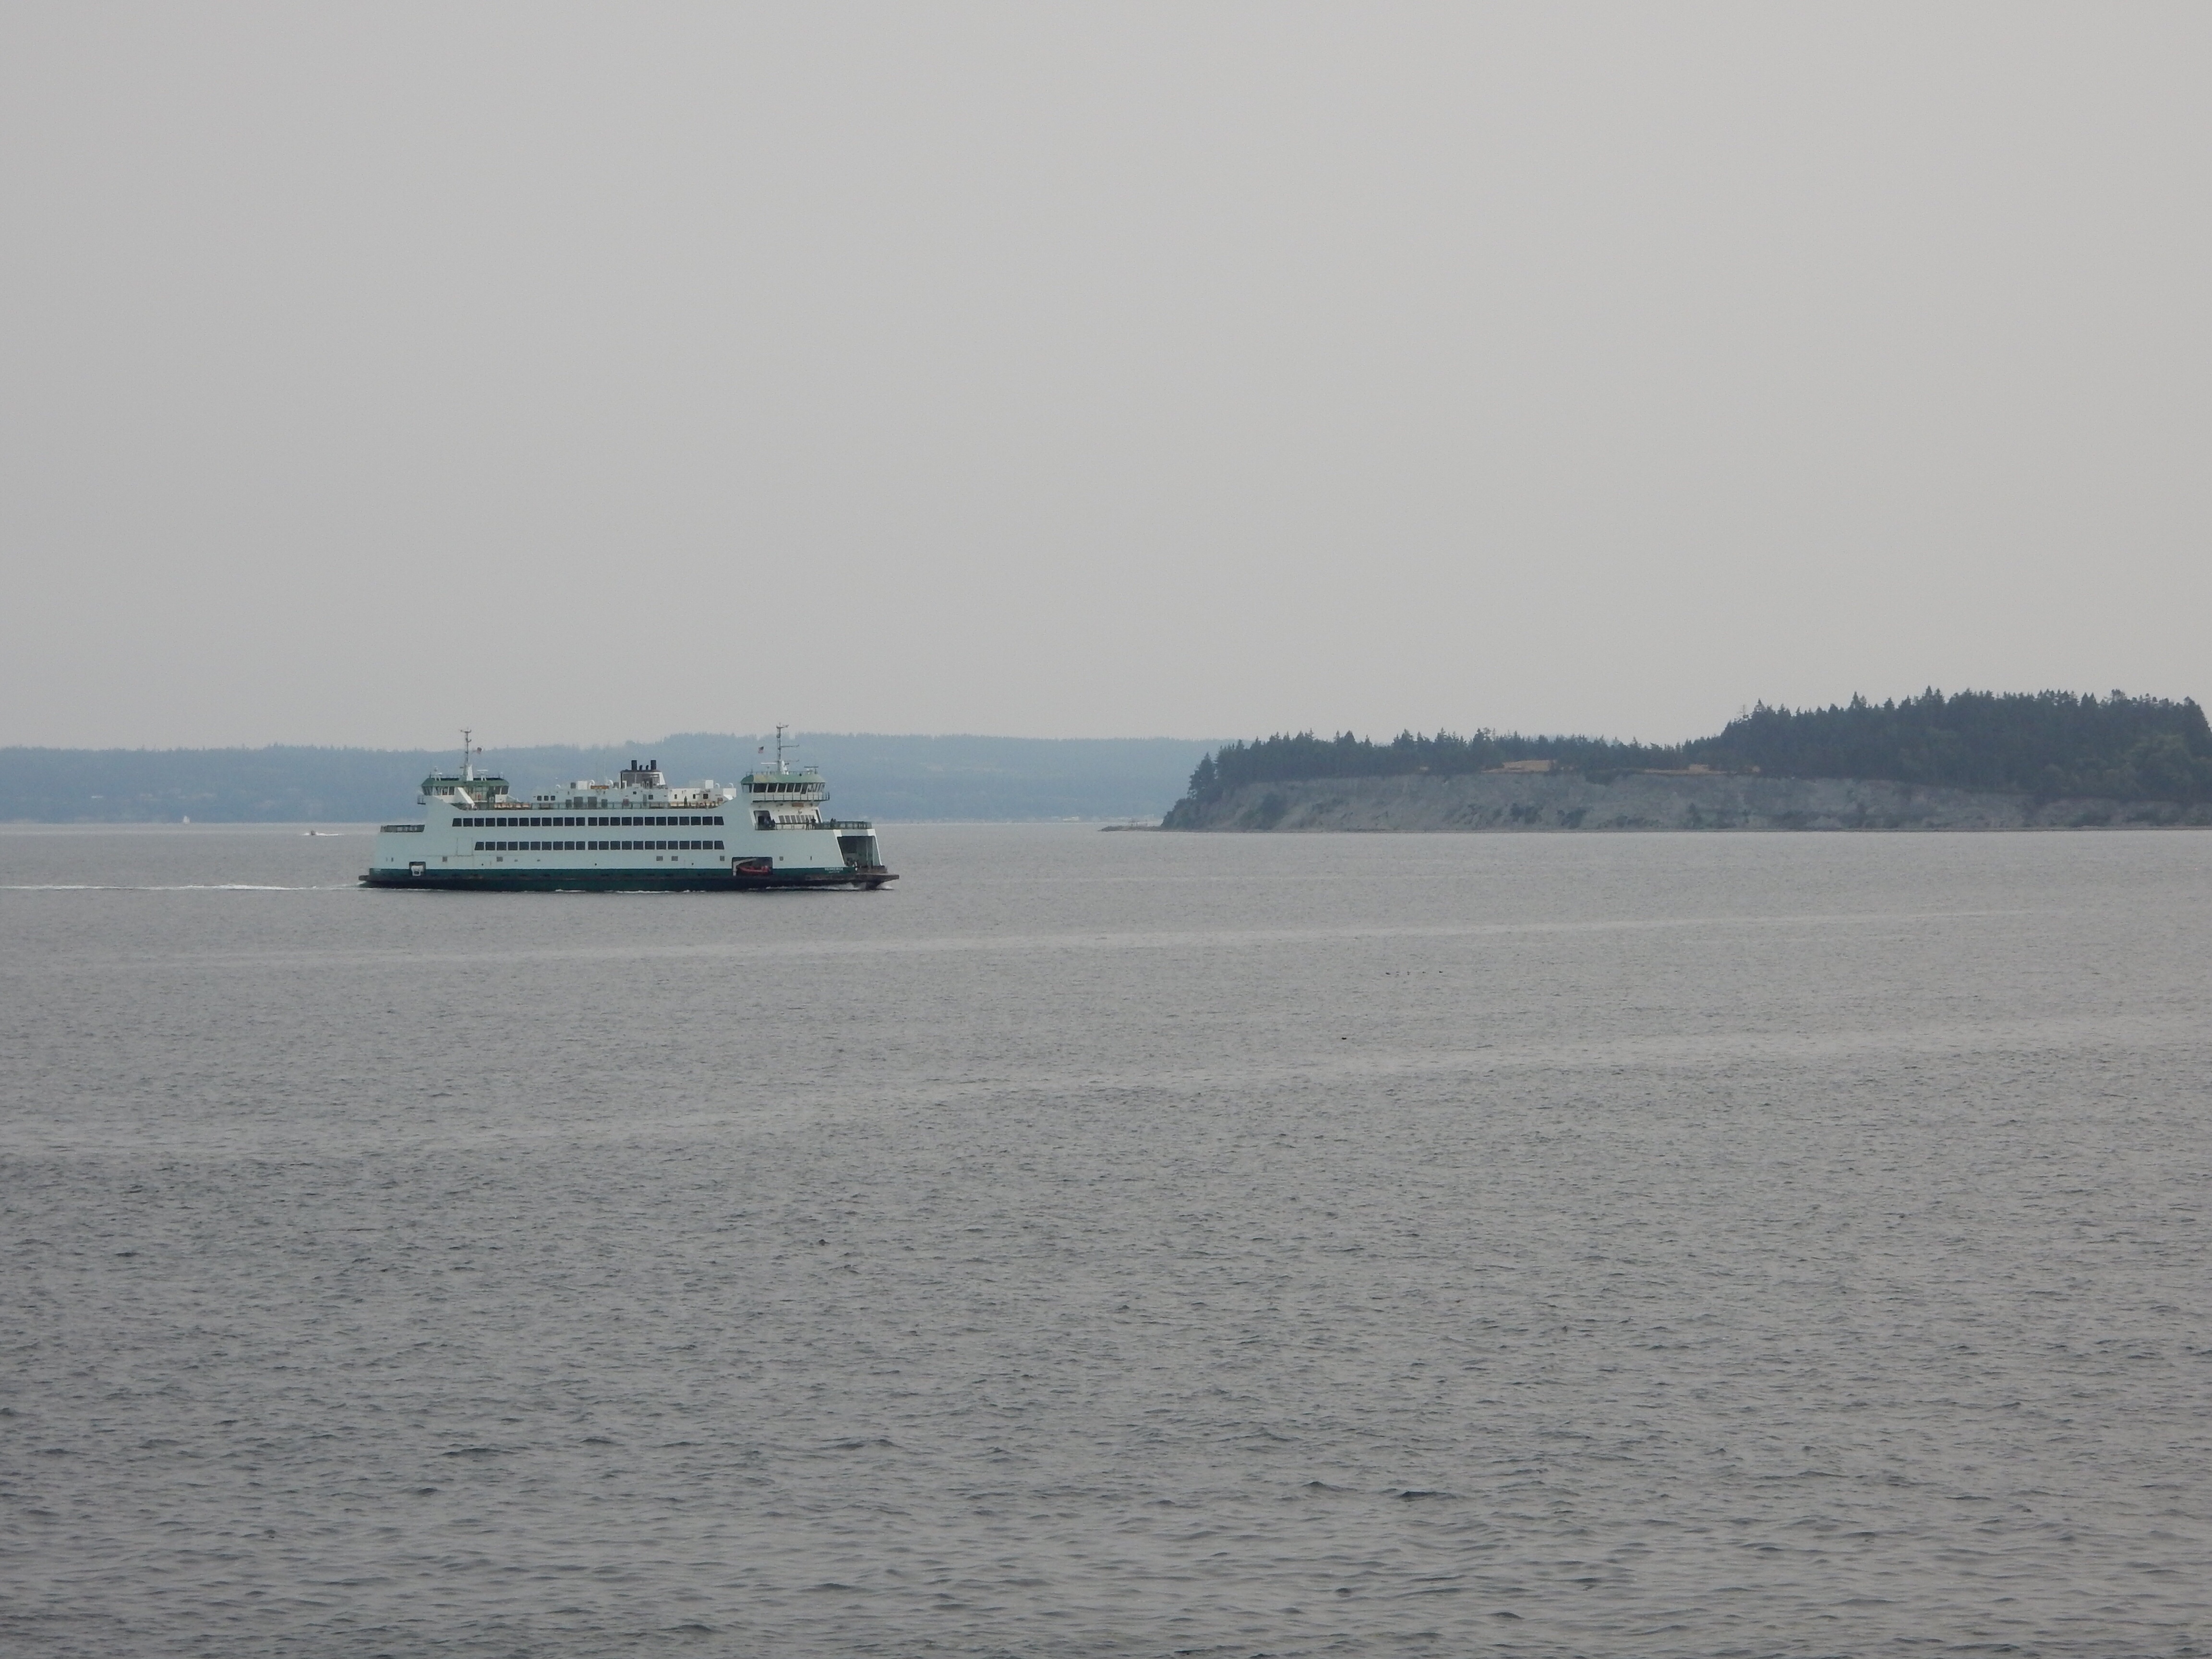 The two Port Townsend/Whidbey Island ferries meet mid-sound during each run.